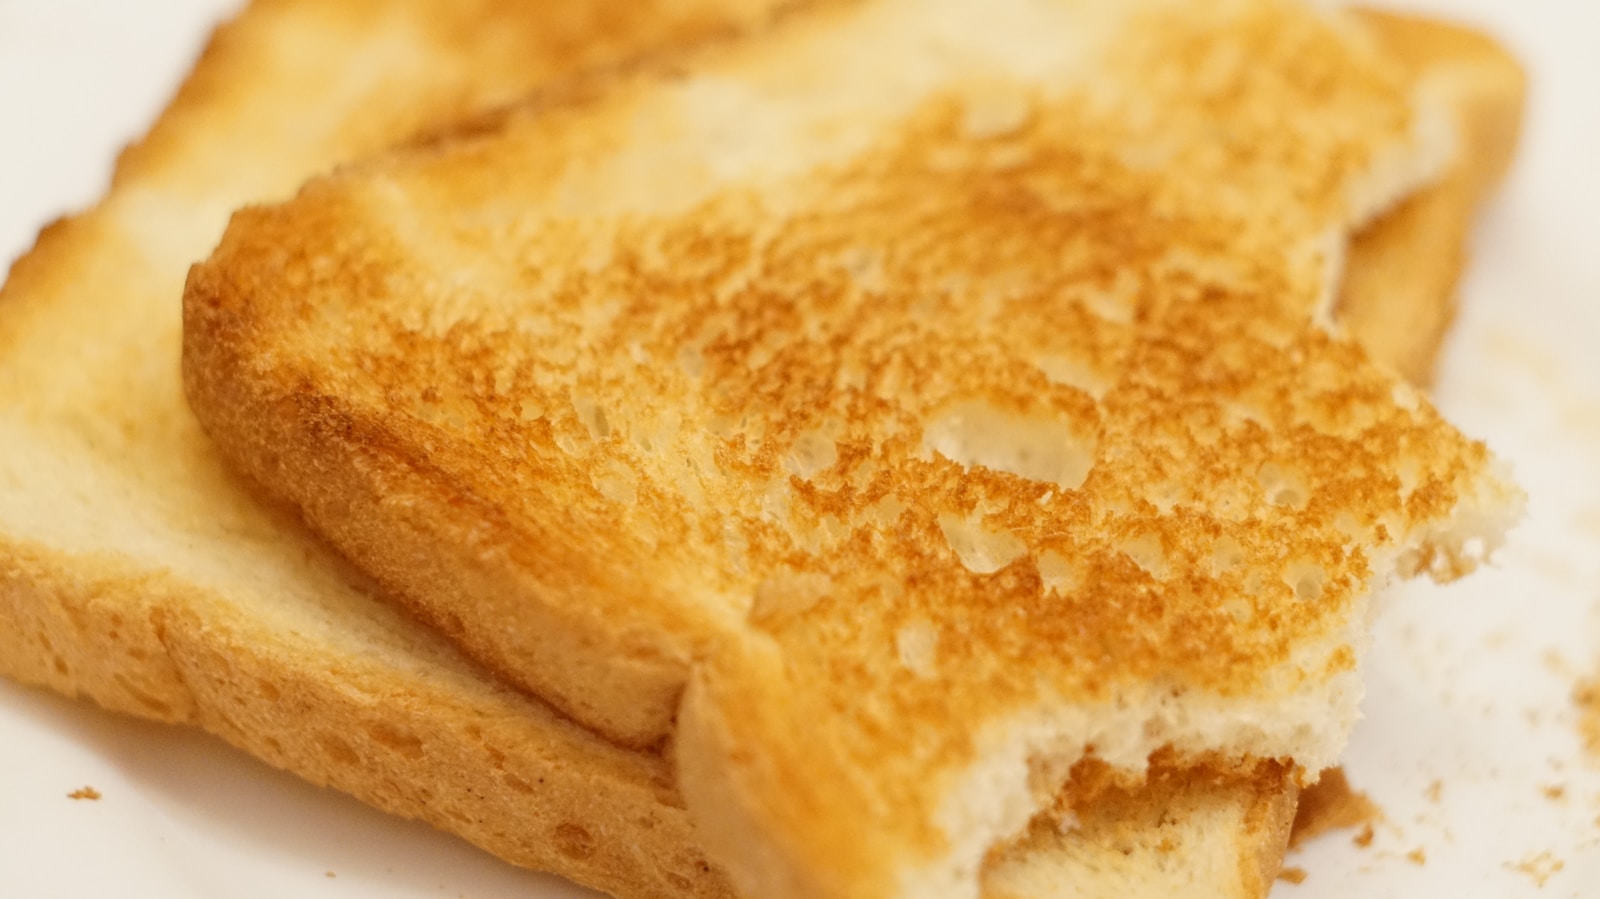 a close up of a toasted sandwich on a plate